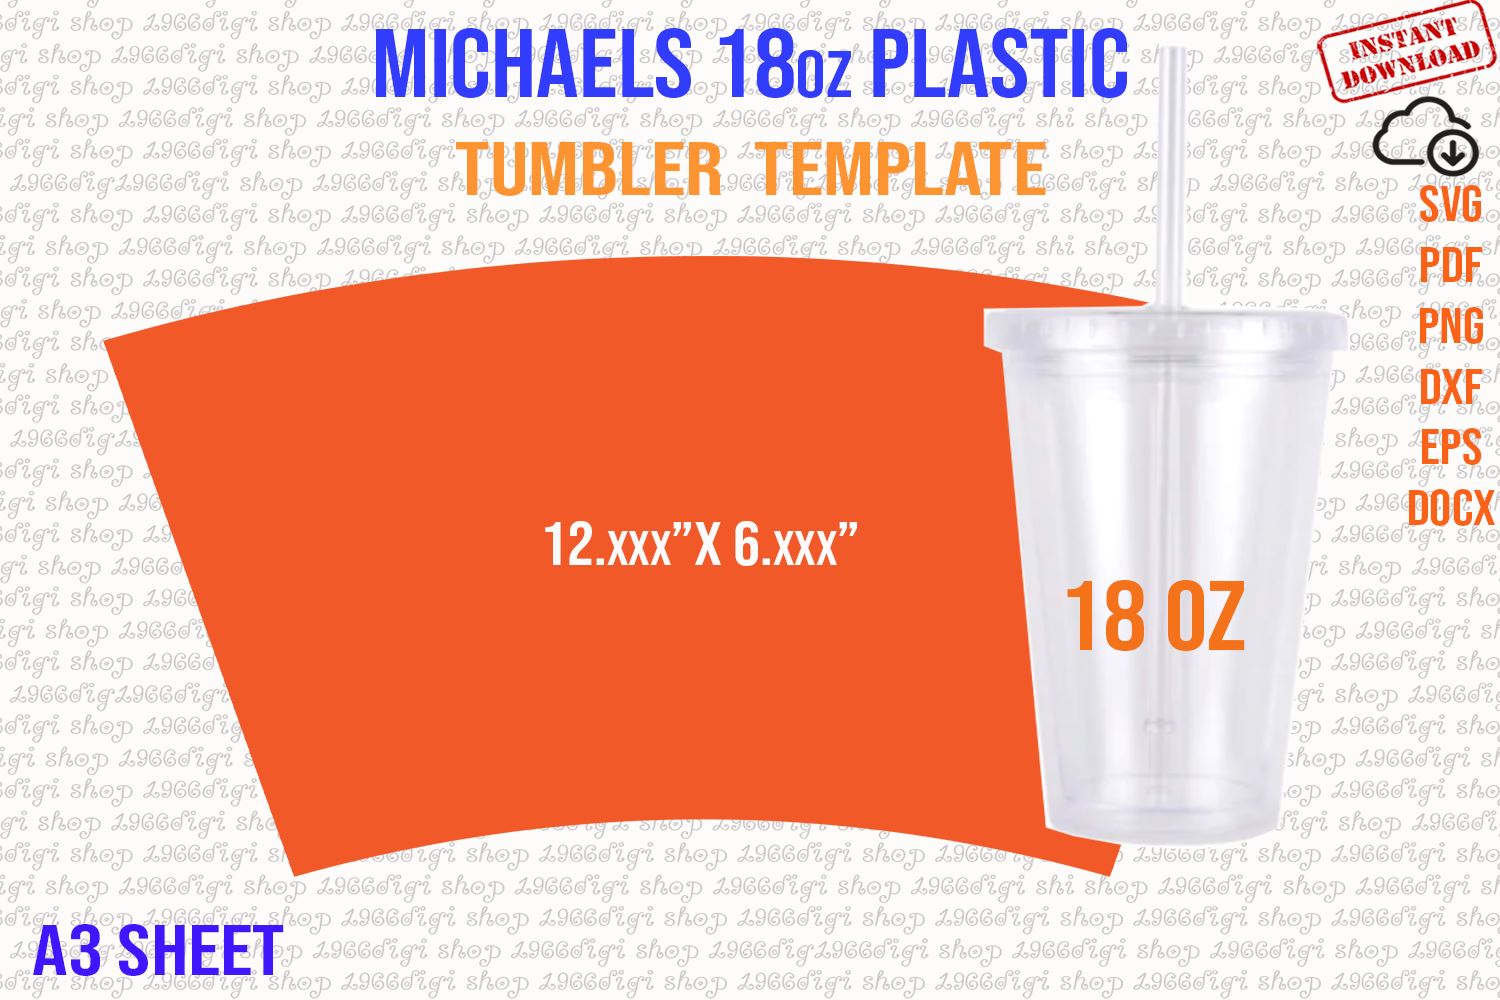 Tumbler SVG, Wrap, Free, Blank, Cup, Wine